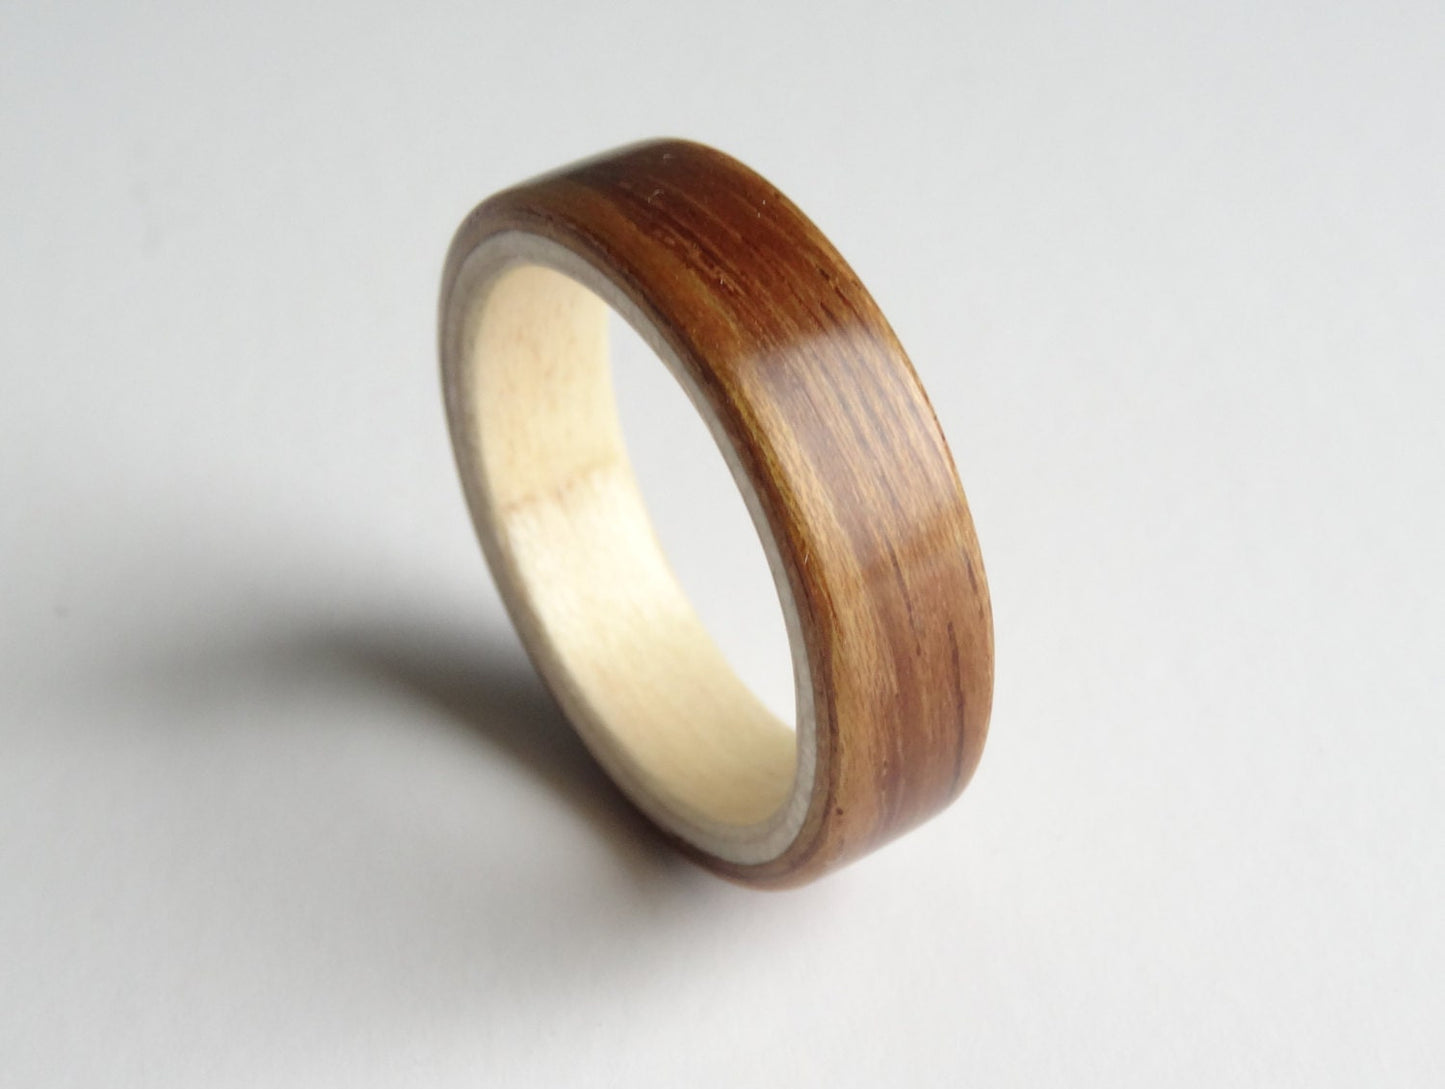 Tropical Olive and Sycamore Bent Wood Ring